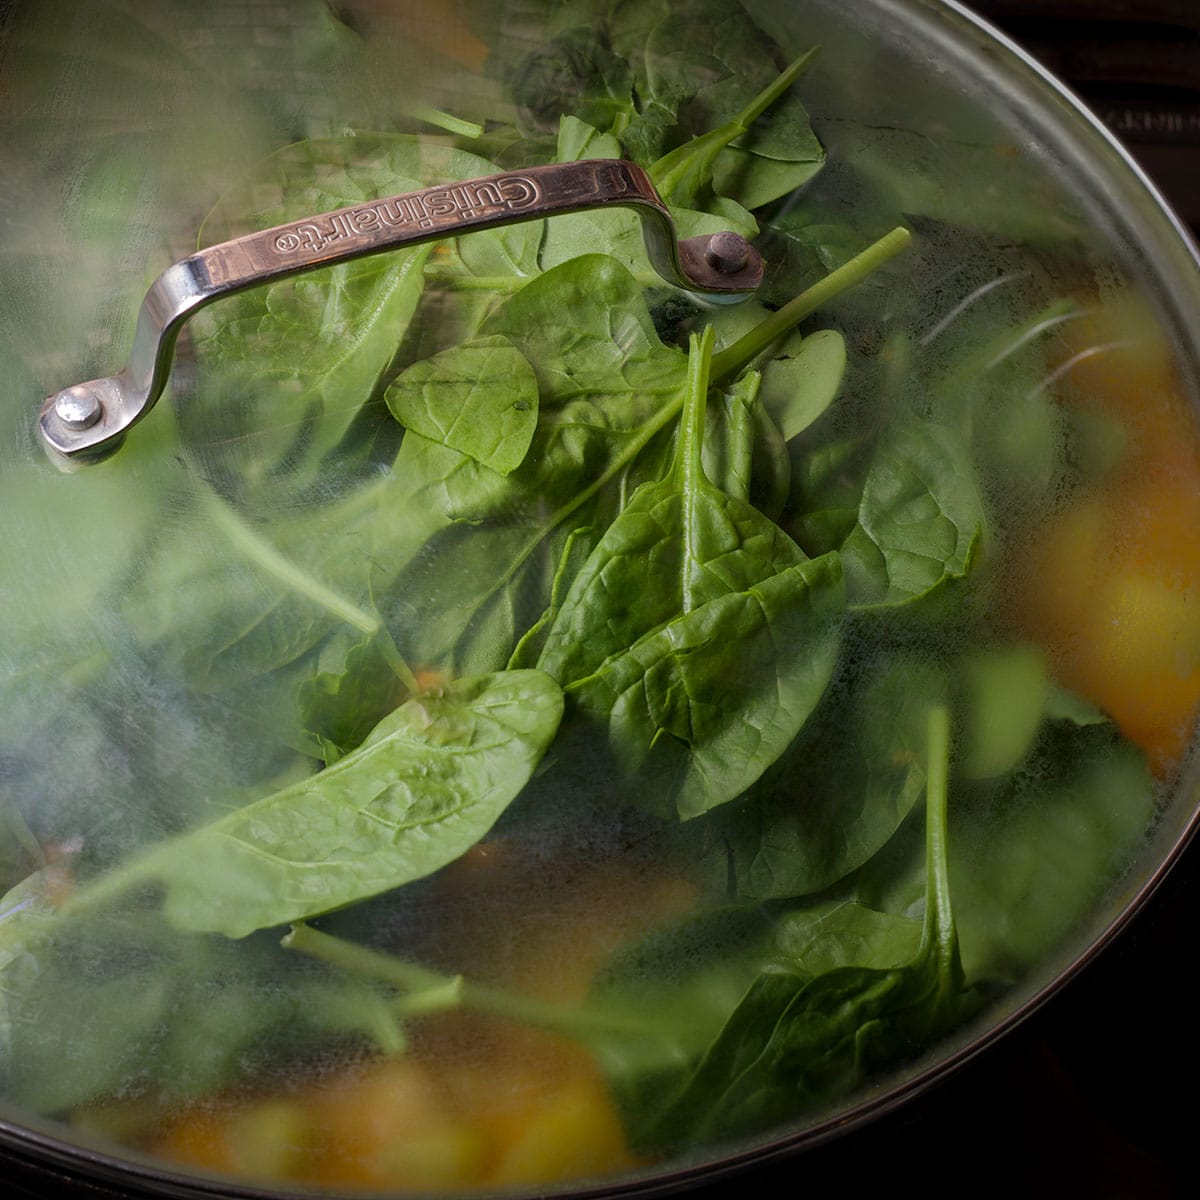 Cover the pan with a lid after adding fresh spinach to encourage the spinach to wilt.